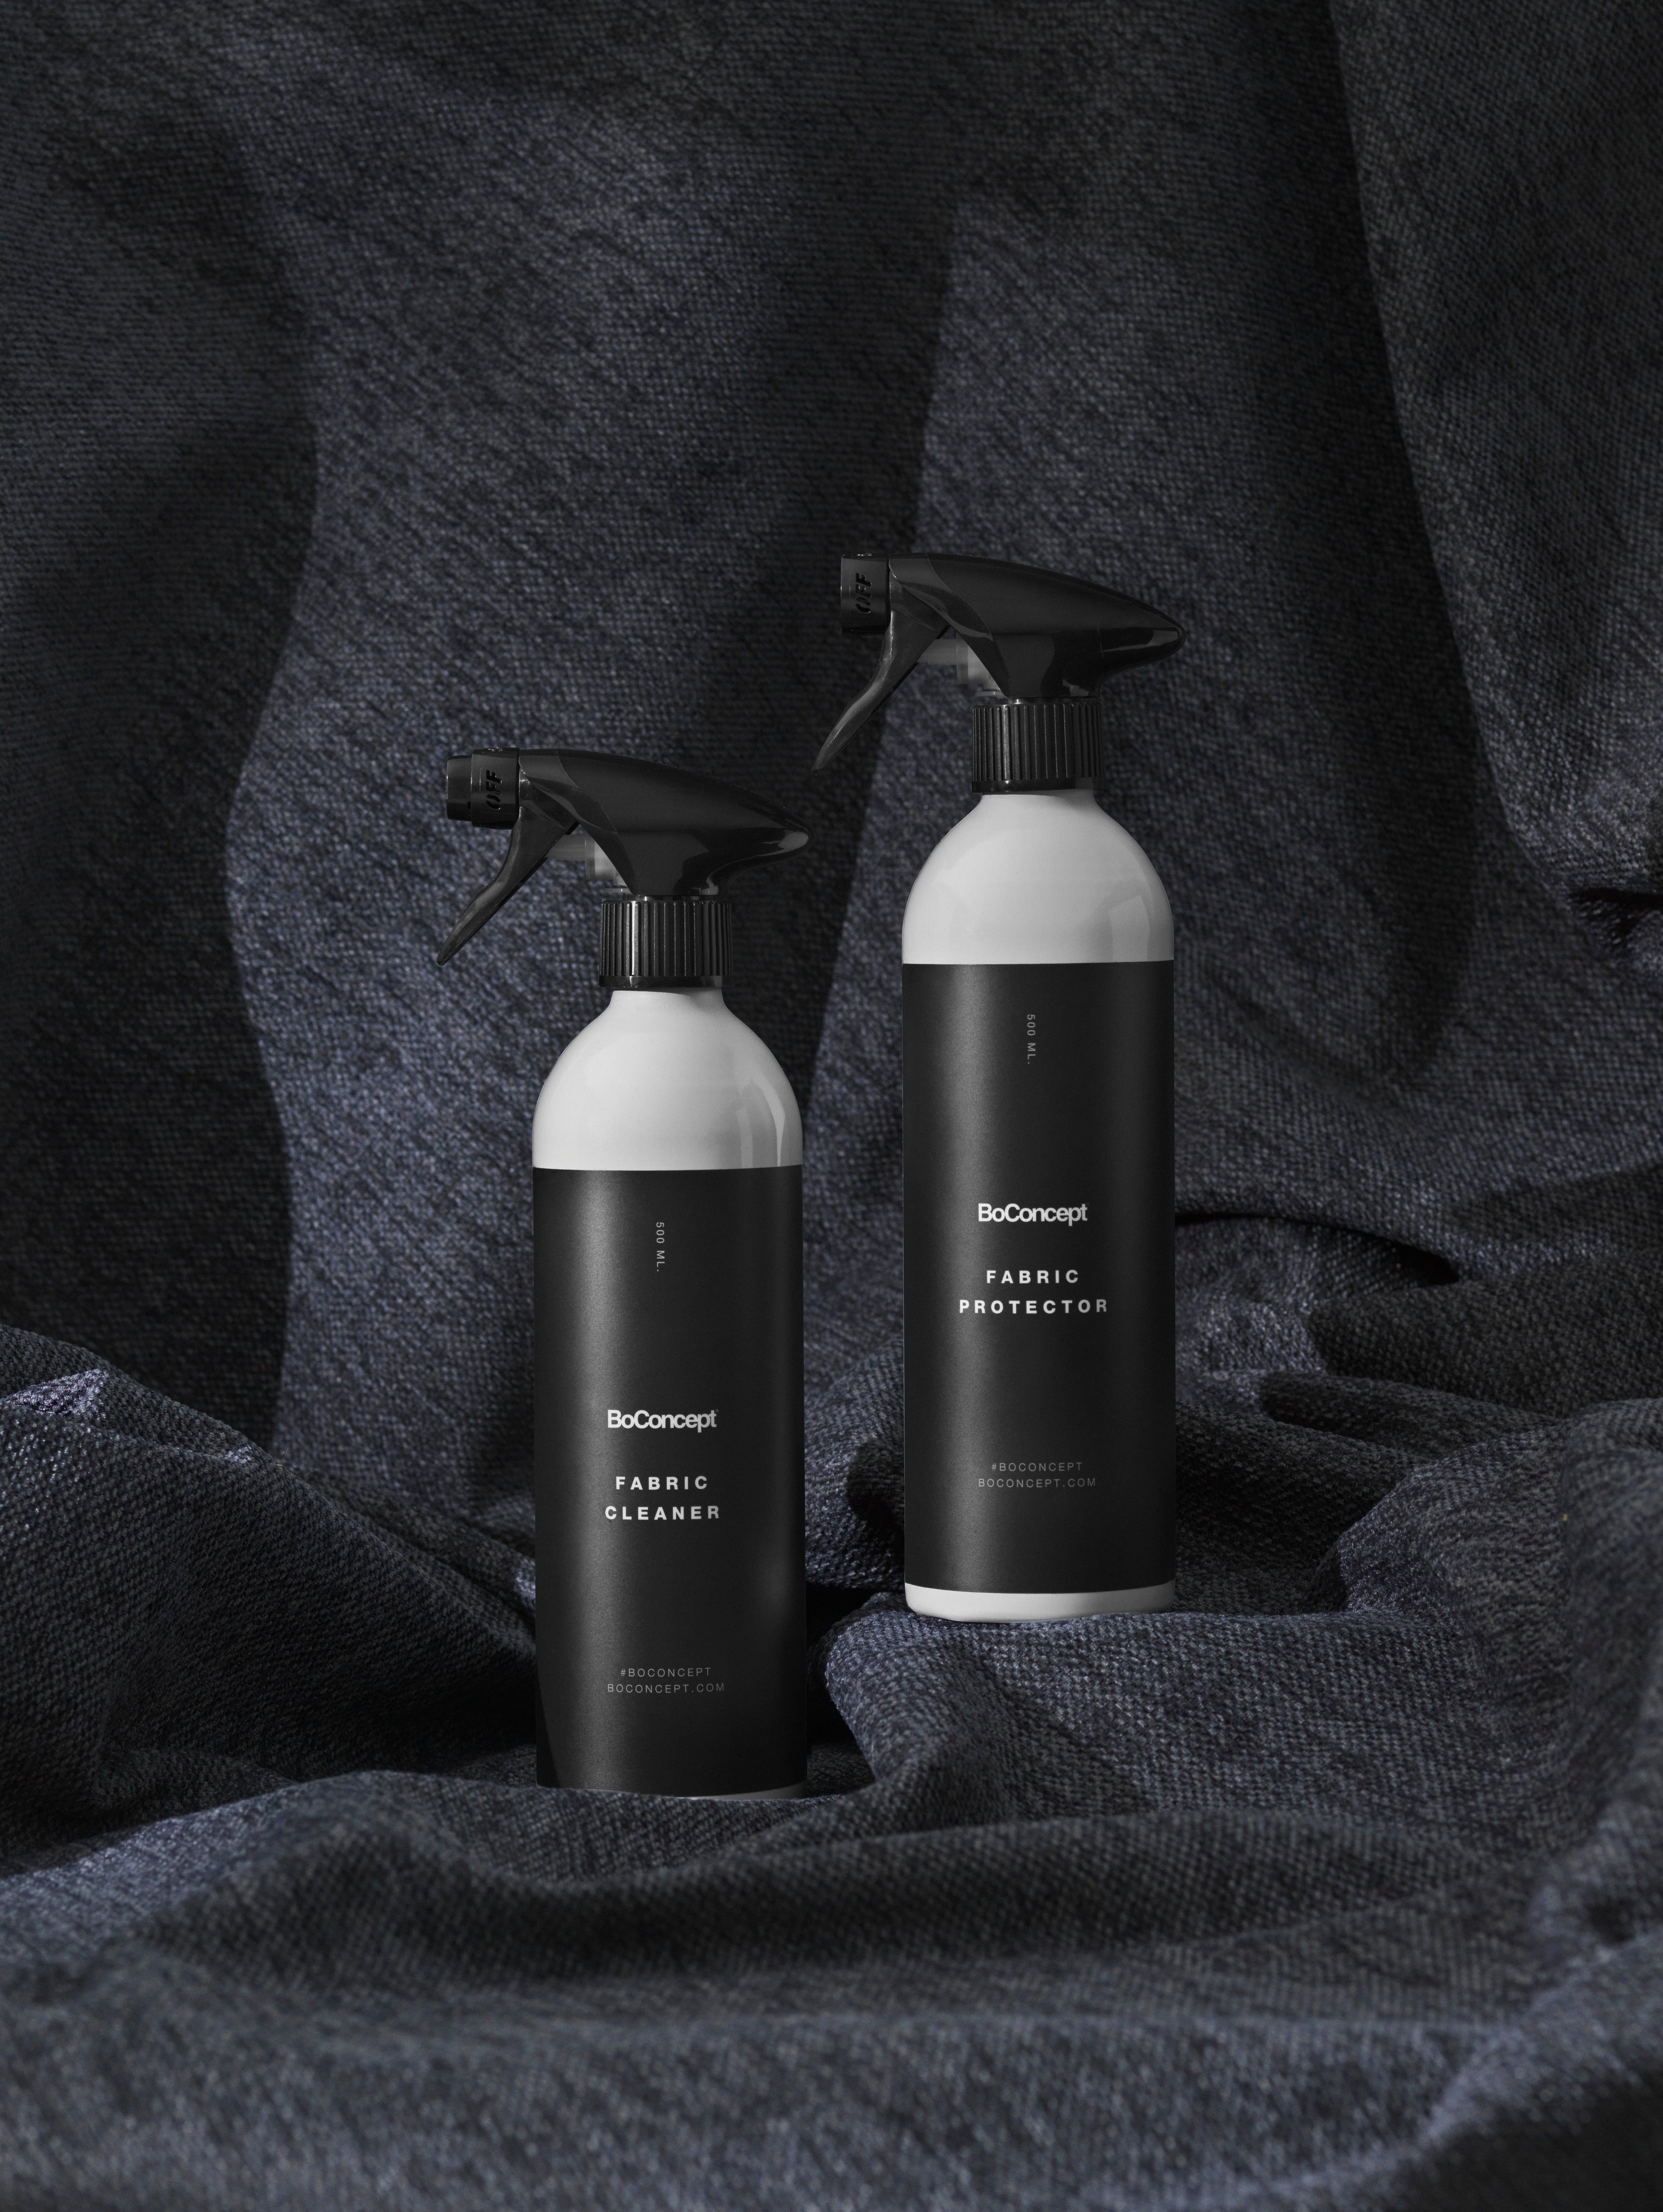 BoConcept fabric cleaner and protector bottles on a textured blue fabric.